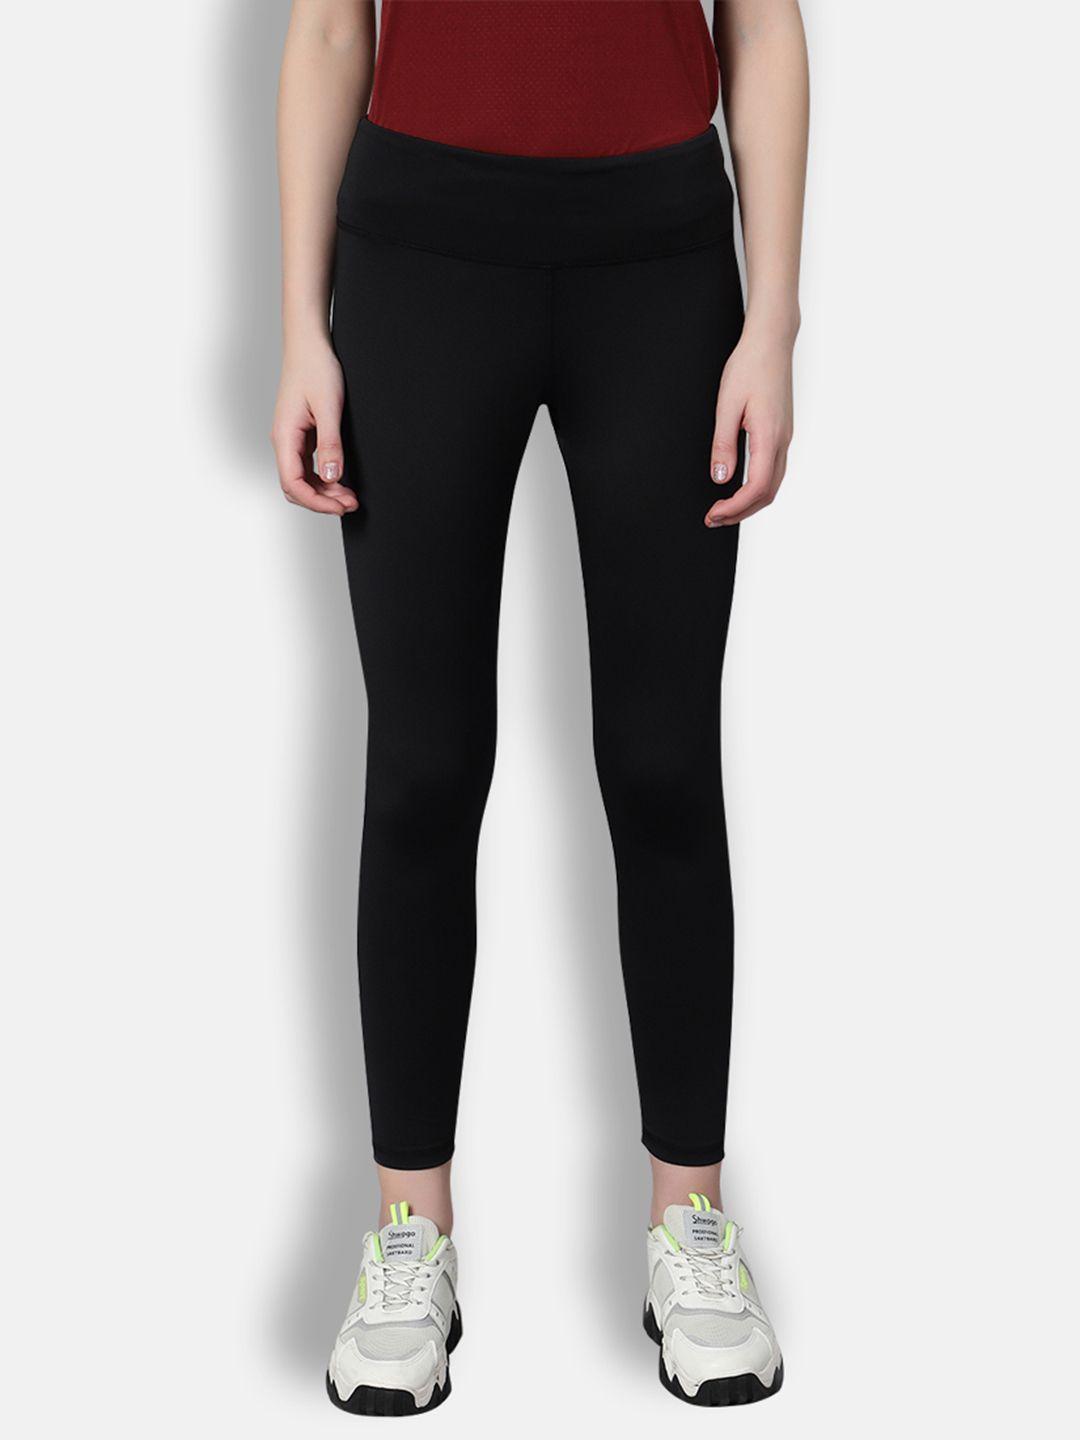 omtex-high-raise-ankle-length-sports-tights